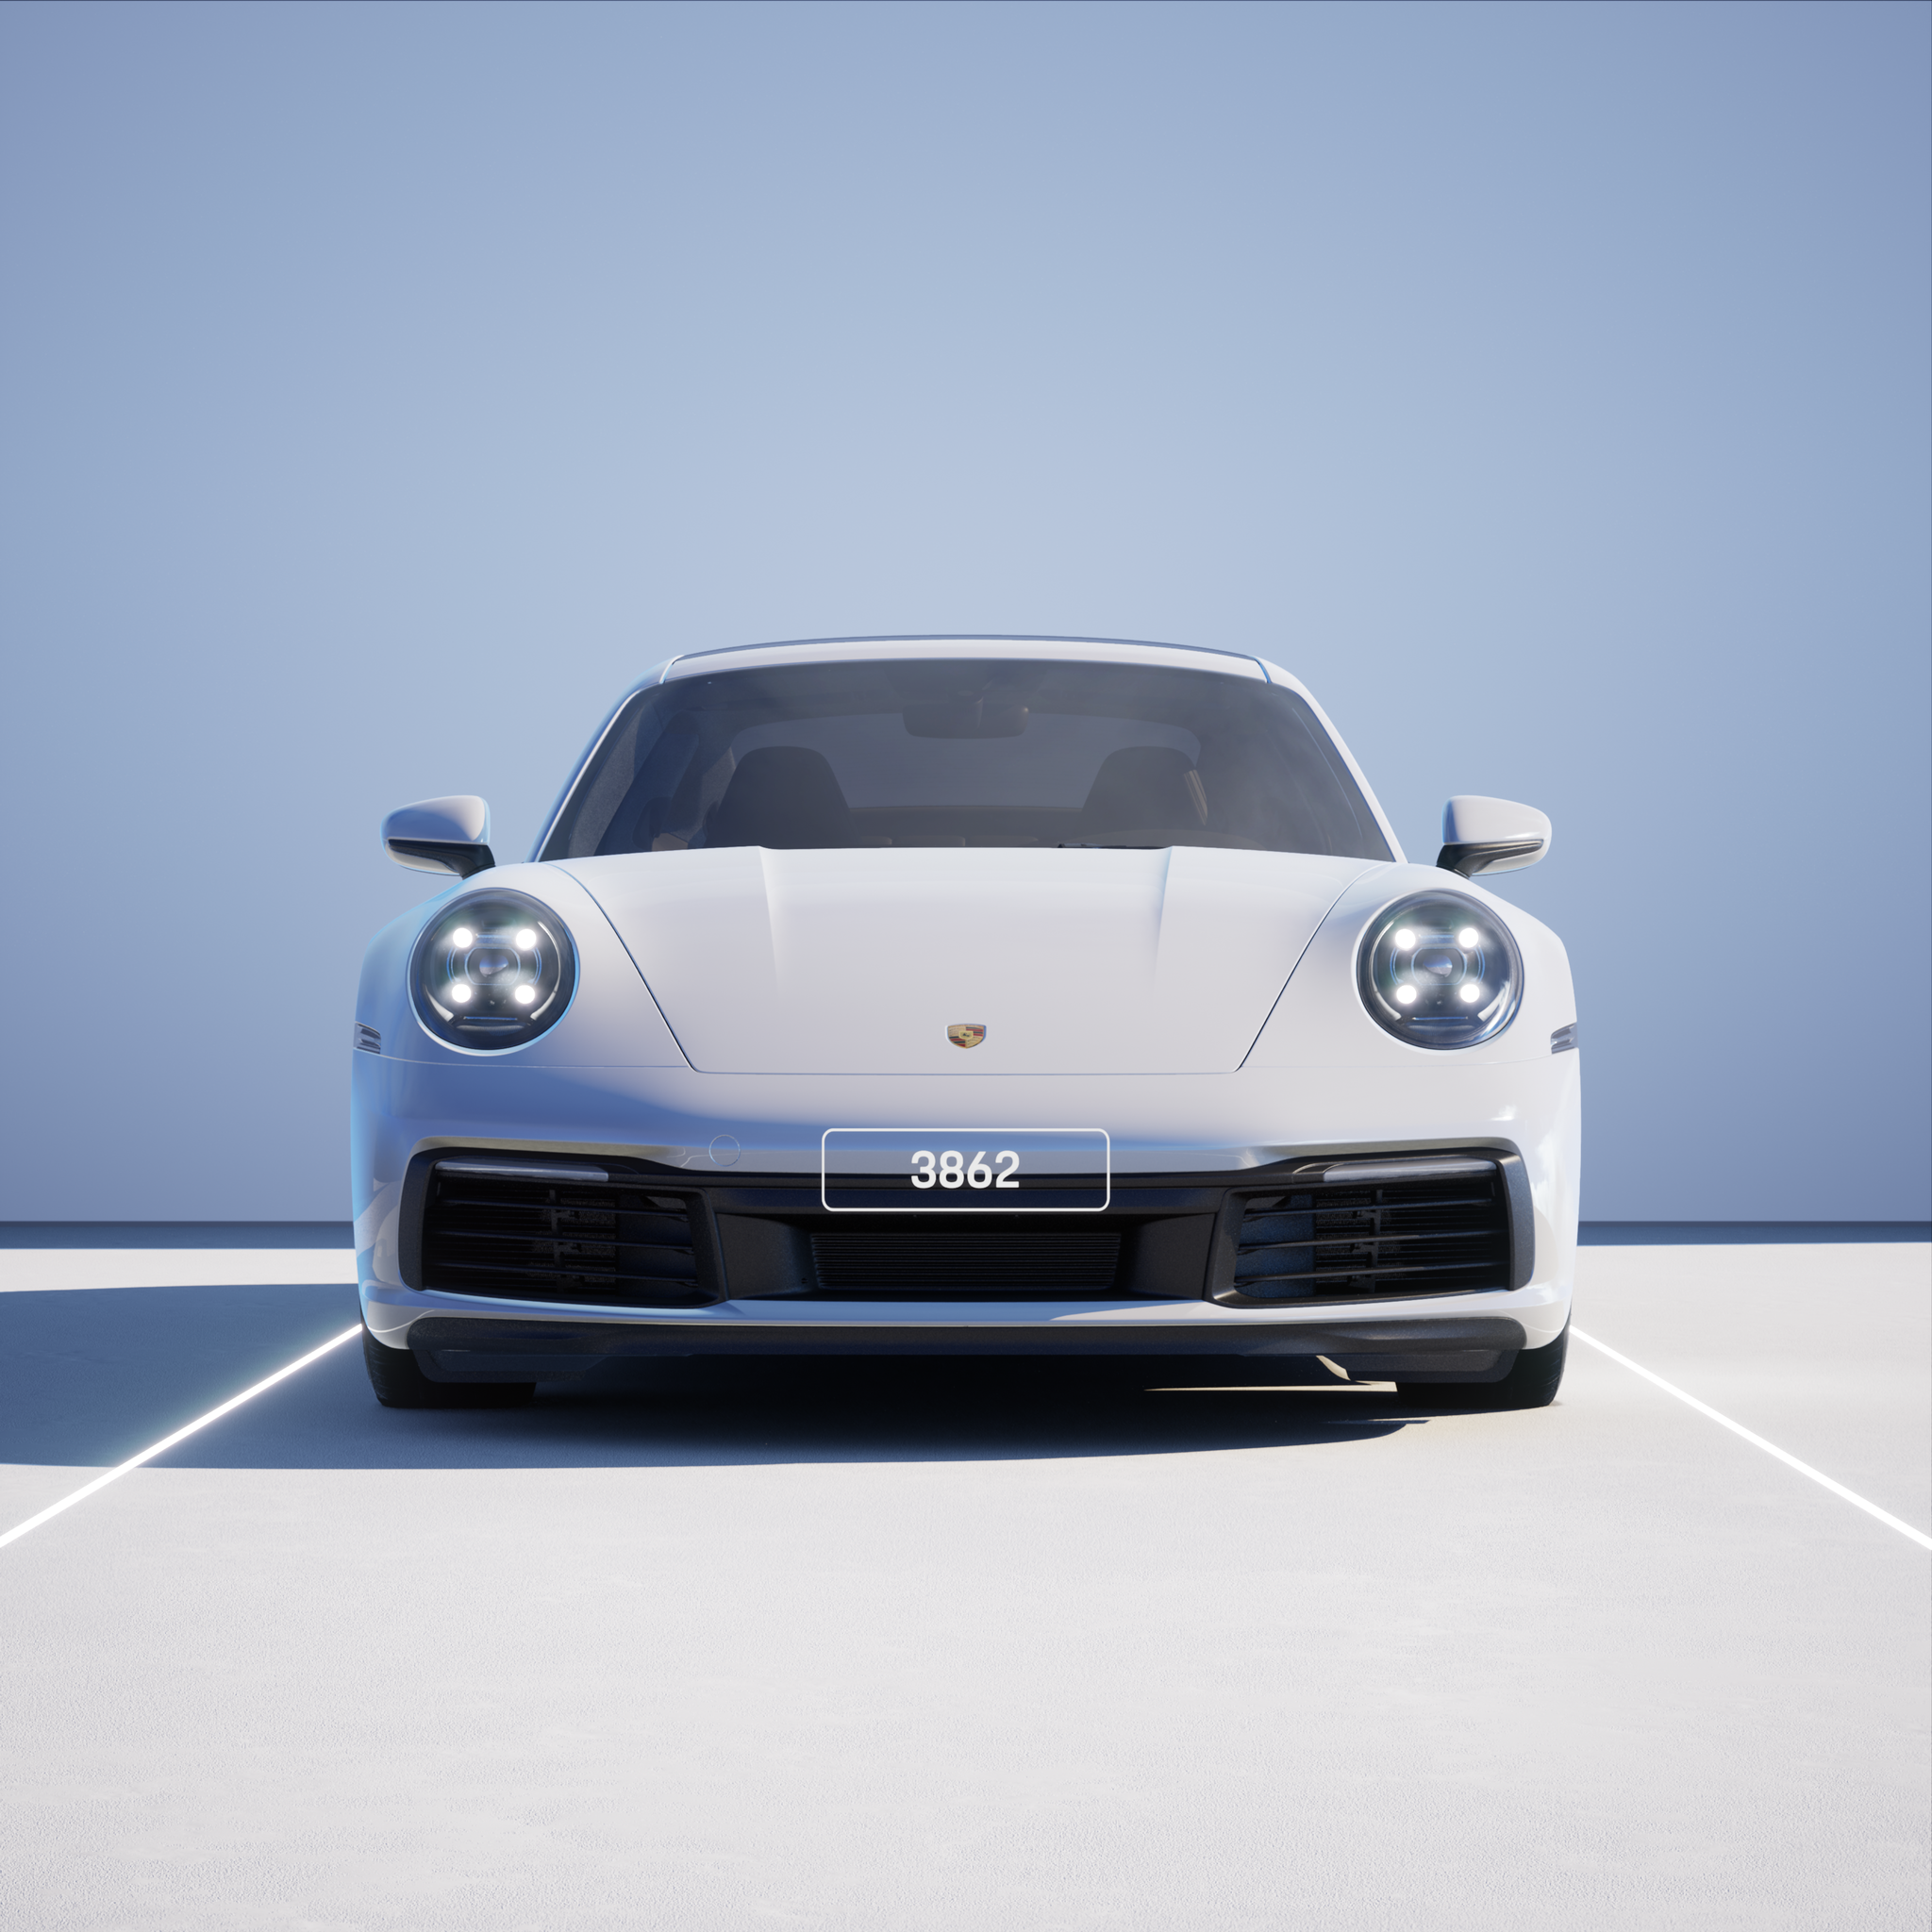 The PORSCHΞ 911 3862 image in phase